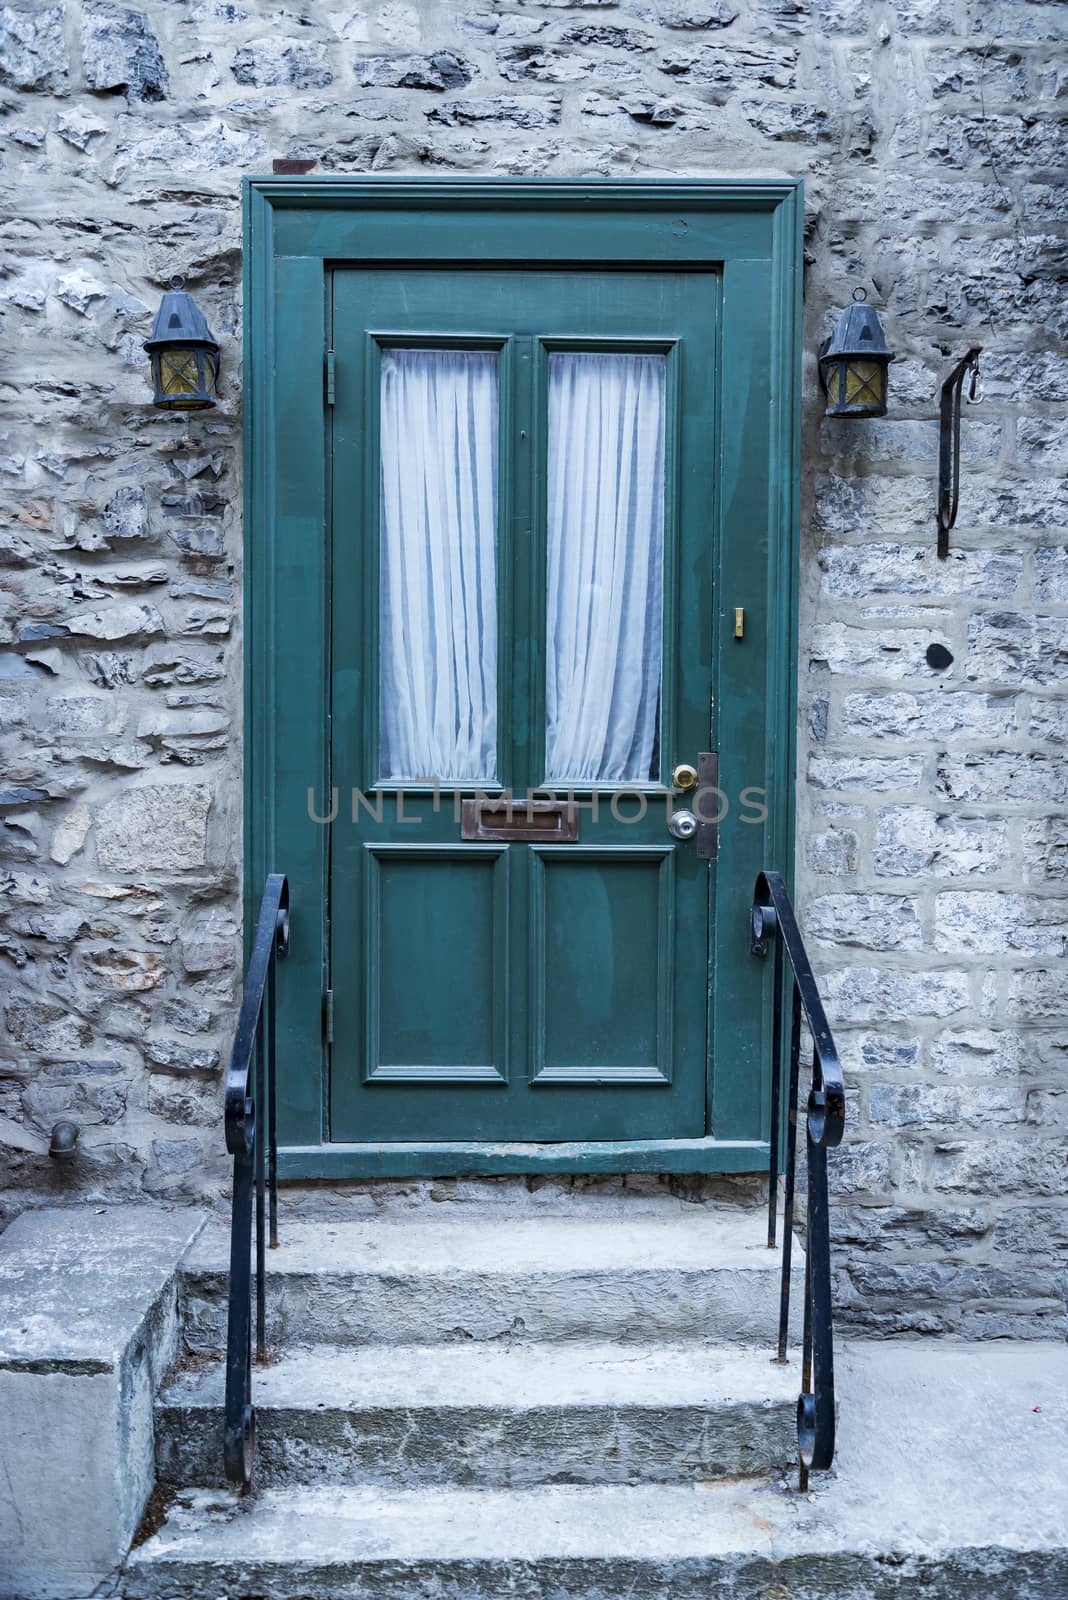 Wooden door entrance in the historical district in Quebec City, Canada